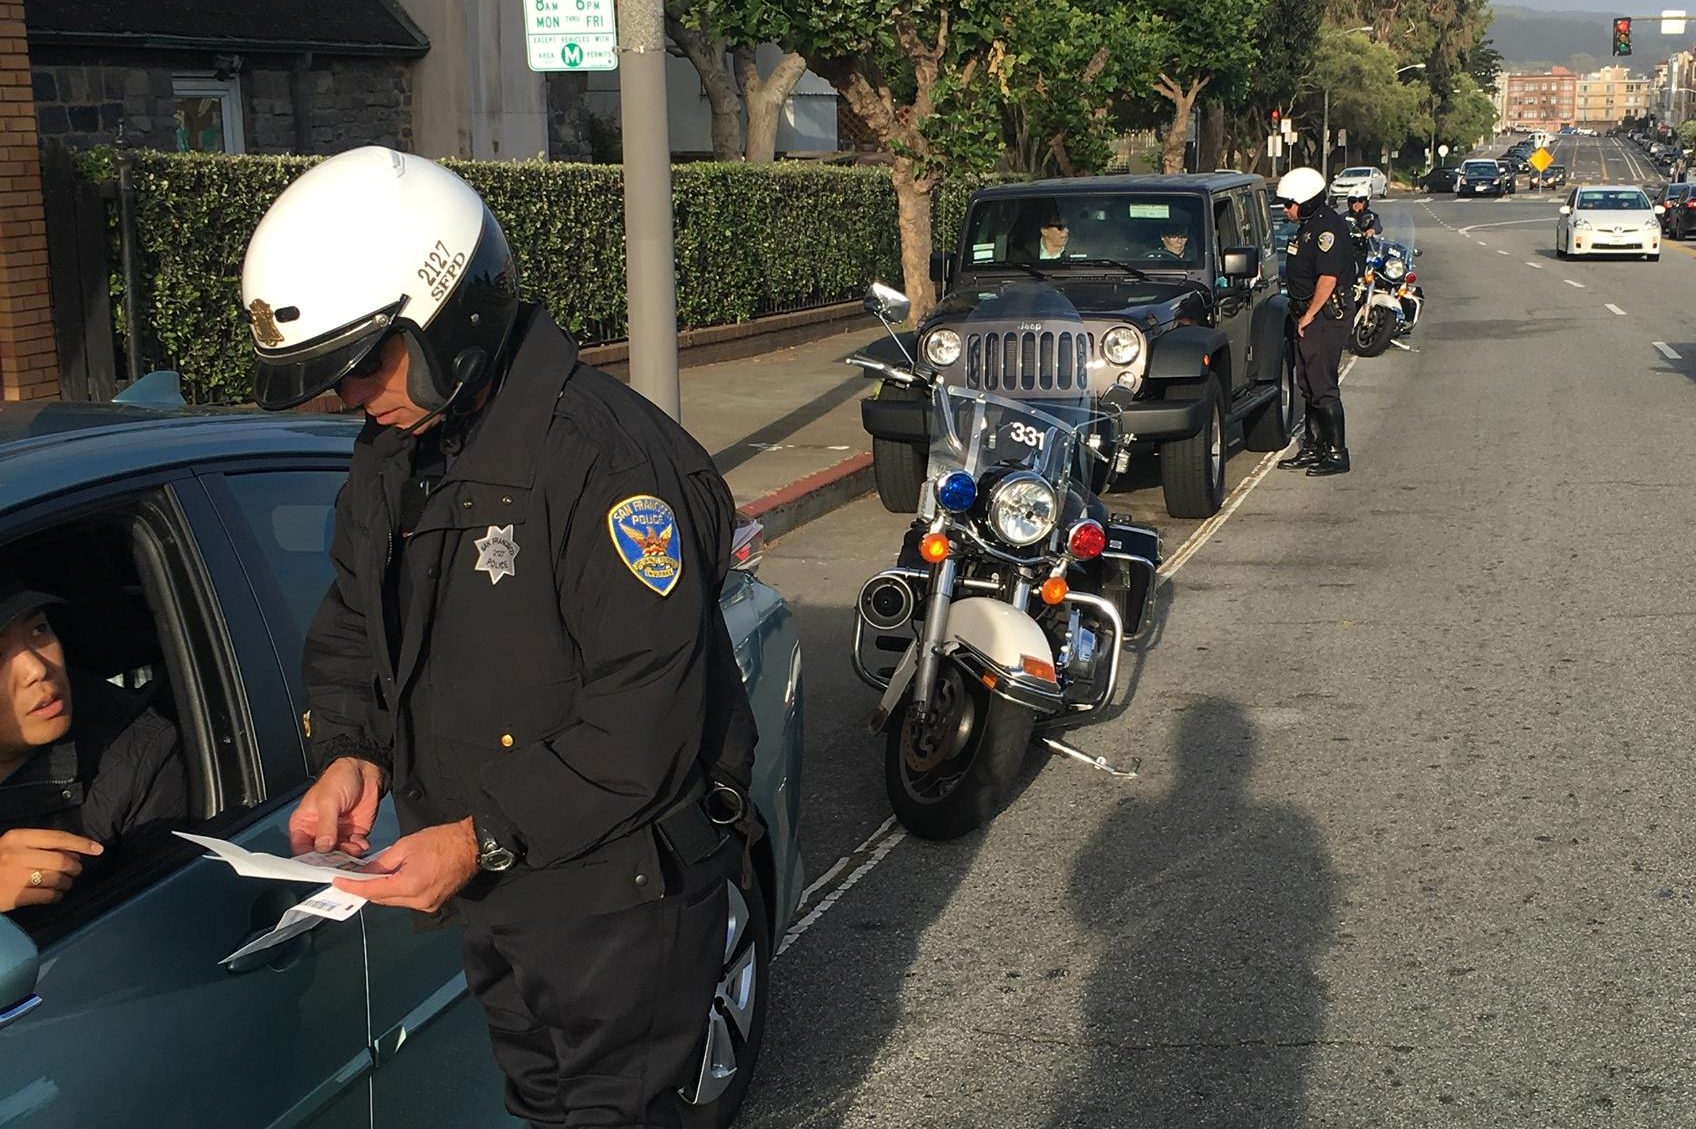 Police officers on motorcycles are conducting a traffic stop on a city street.